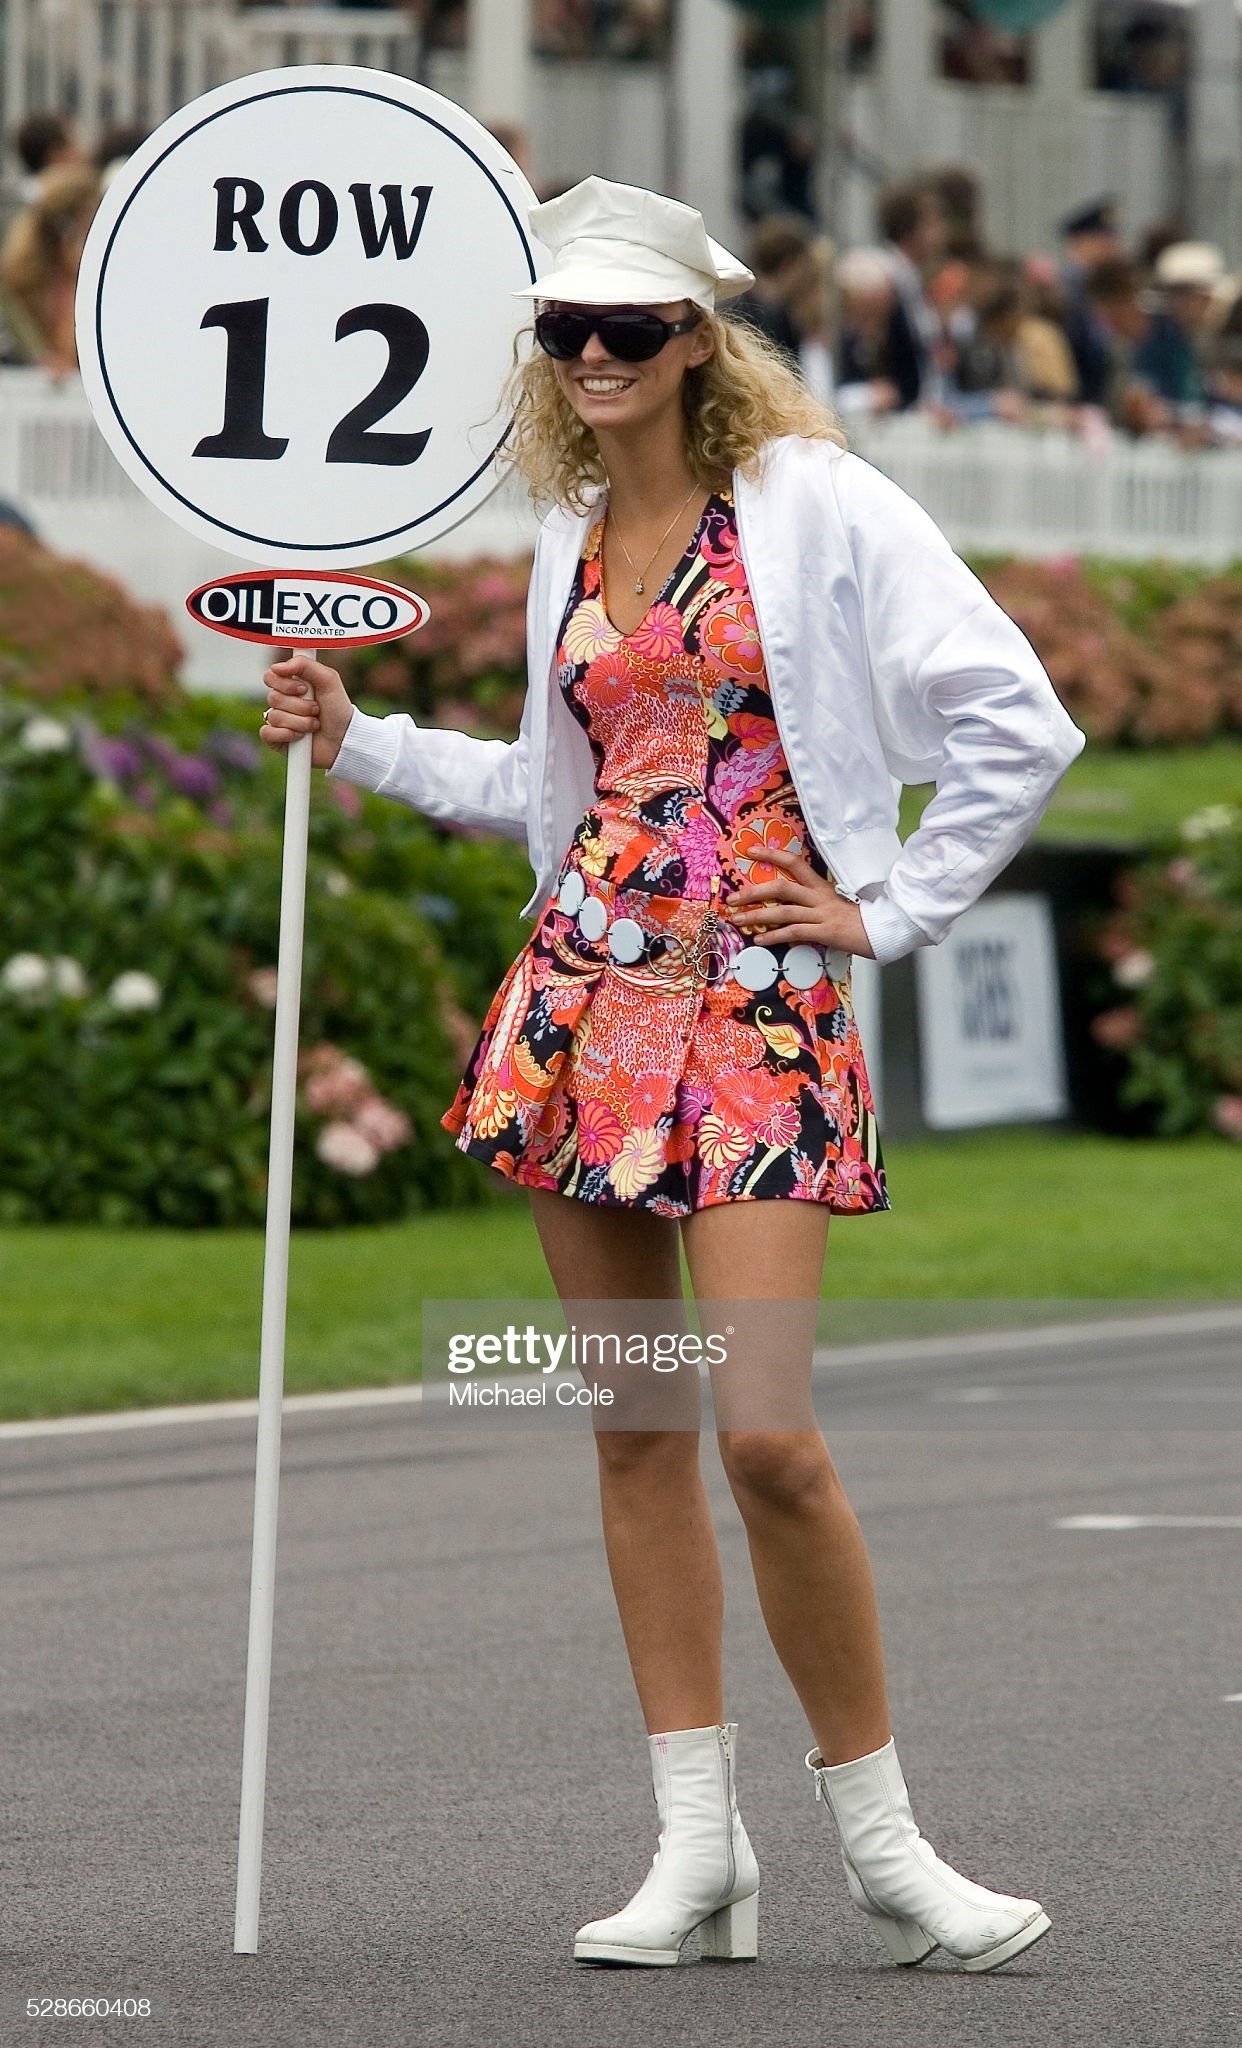 Oilexco grid girl adds glamour to the start line at the Goodwood Revival Meeting on August 03, 2007. 